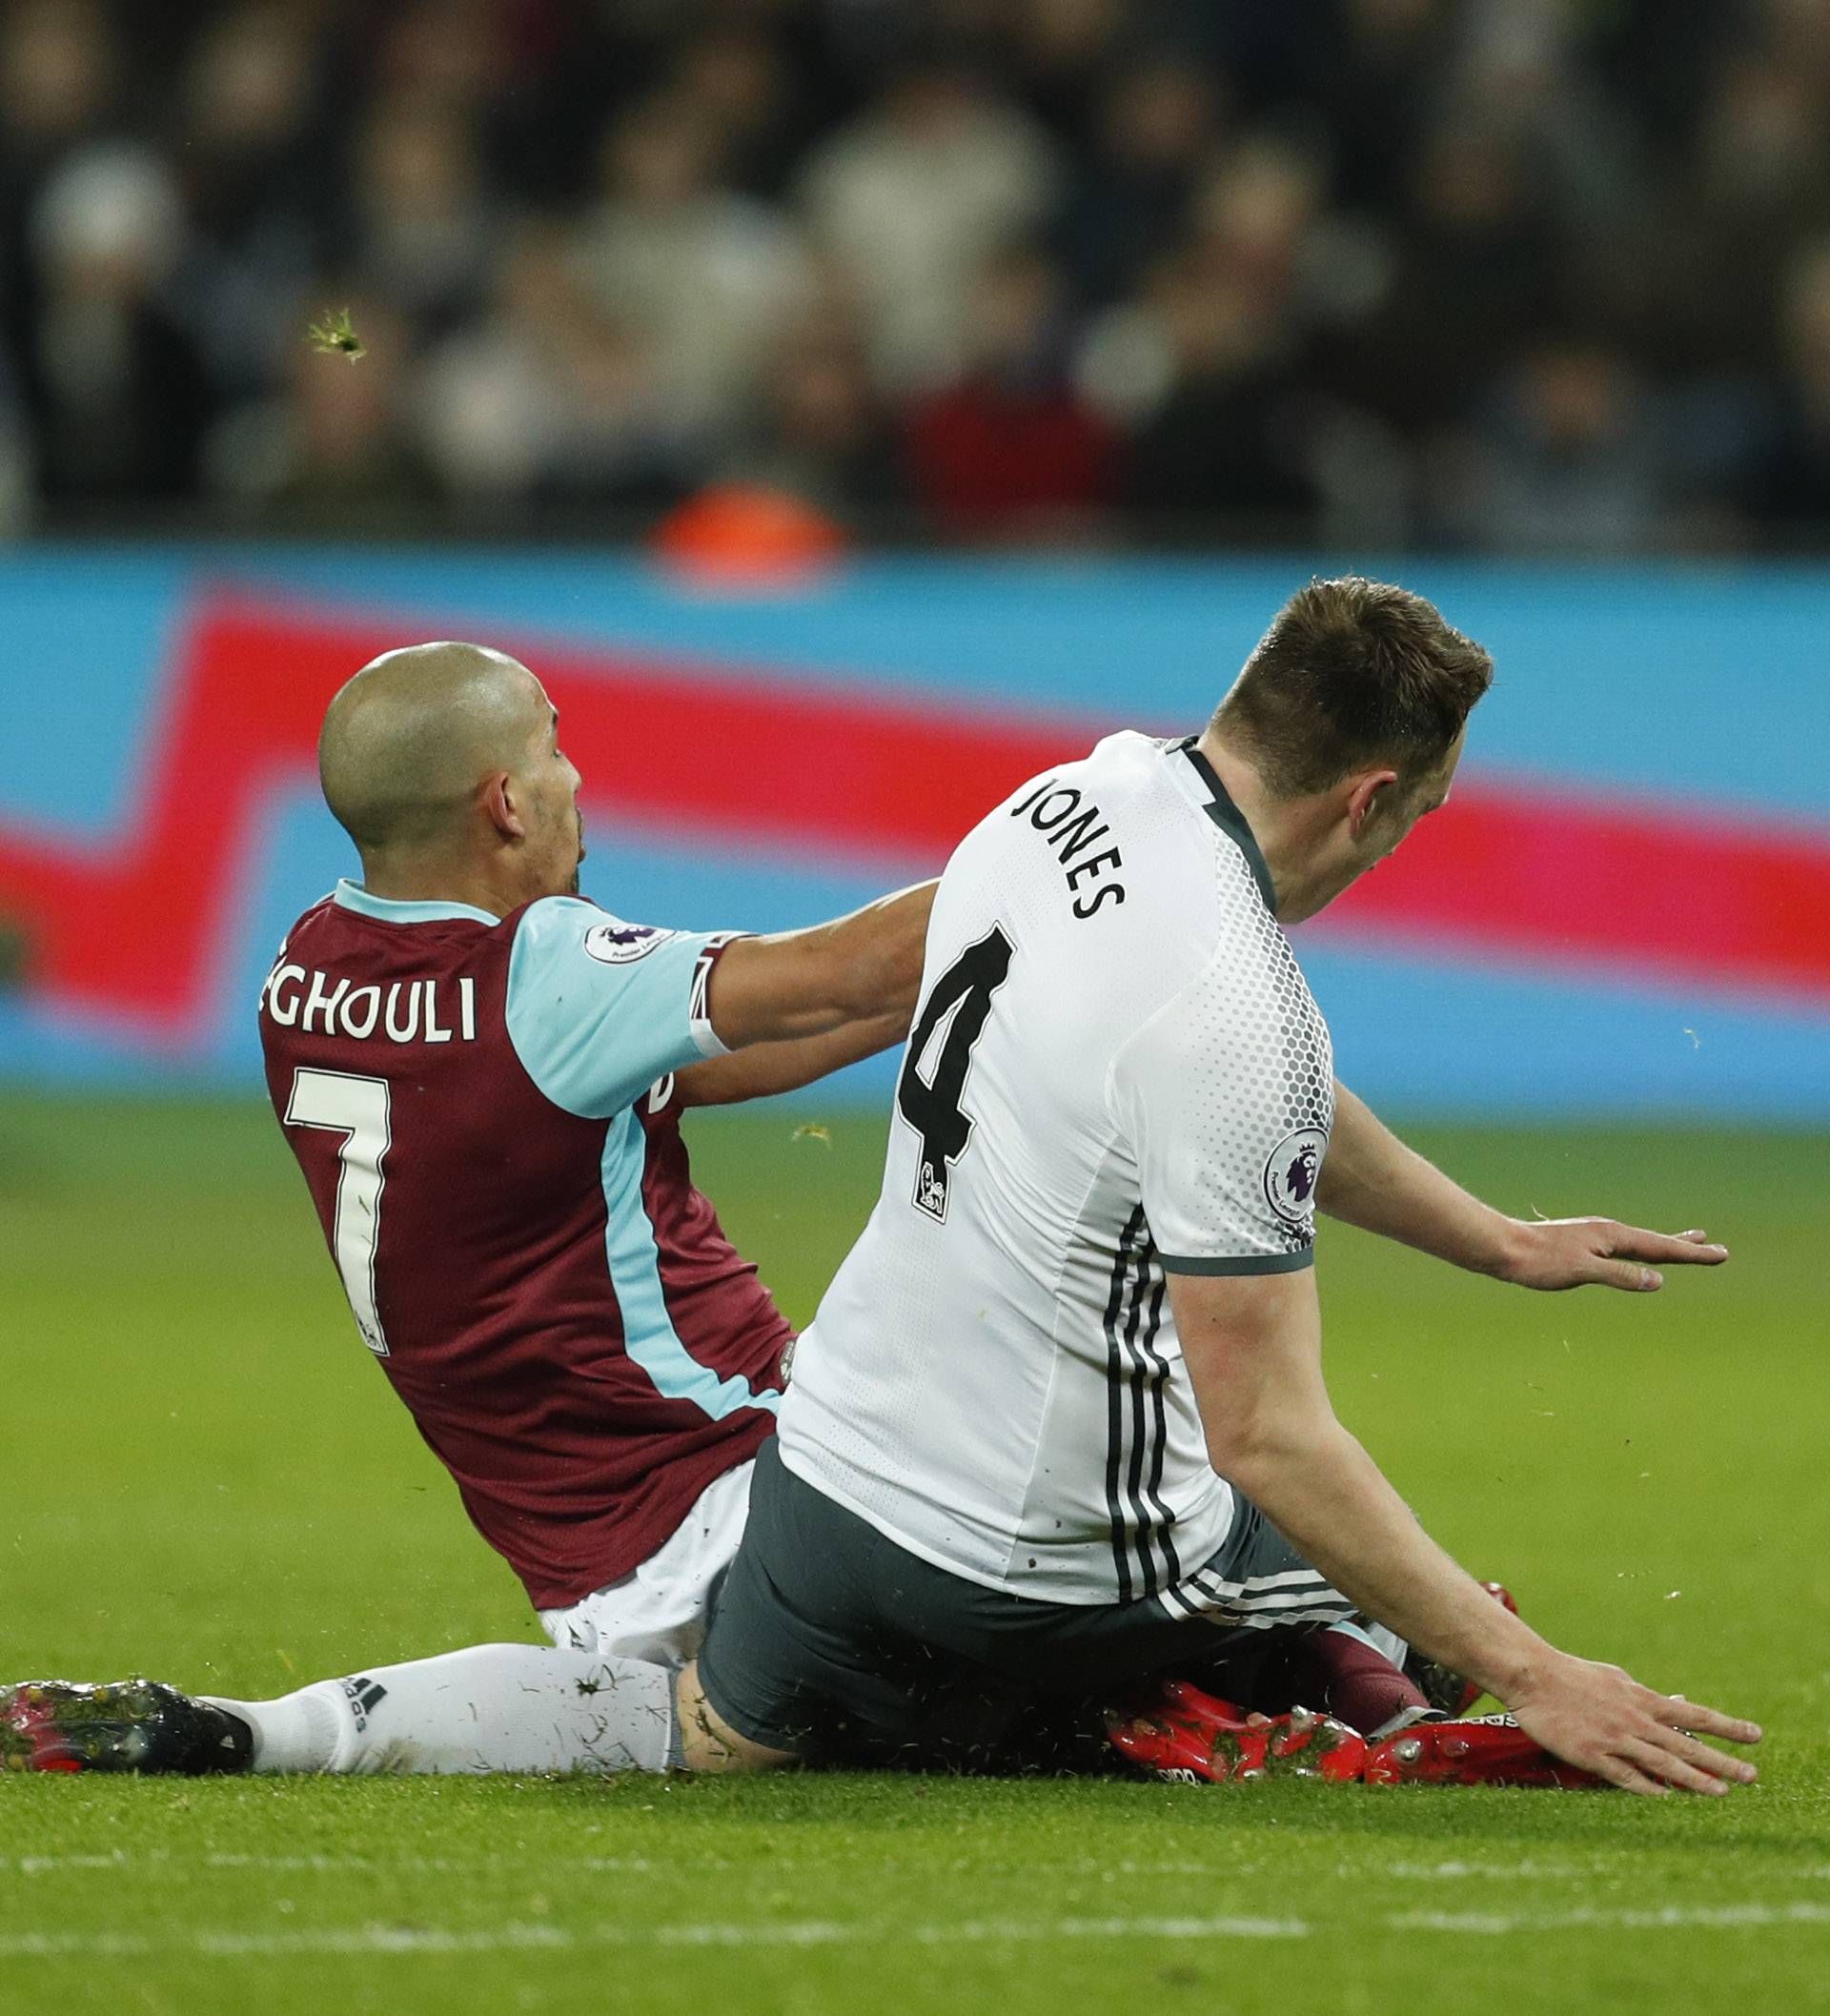 West Ham United's Sofiane Feghouli fouls Manchester United's Phil Jones and is later sent off